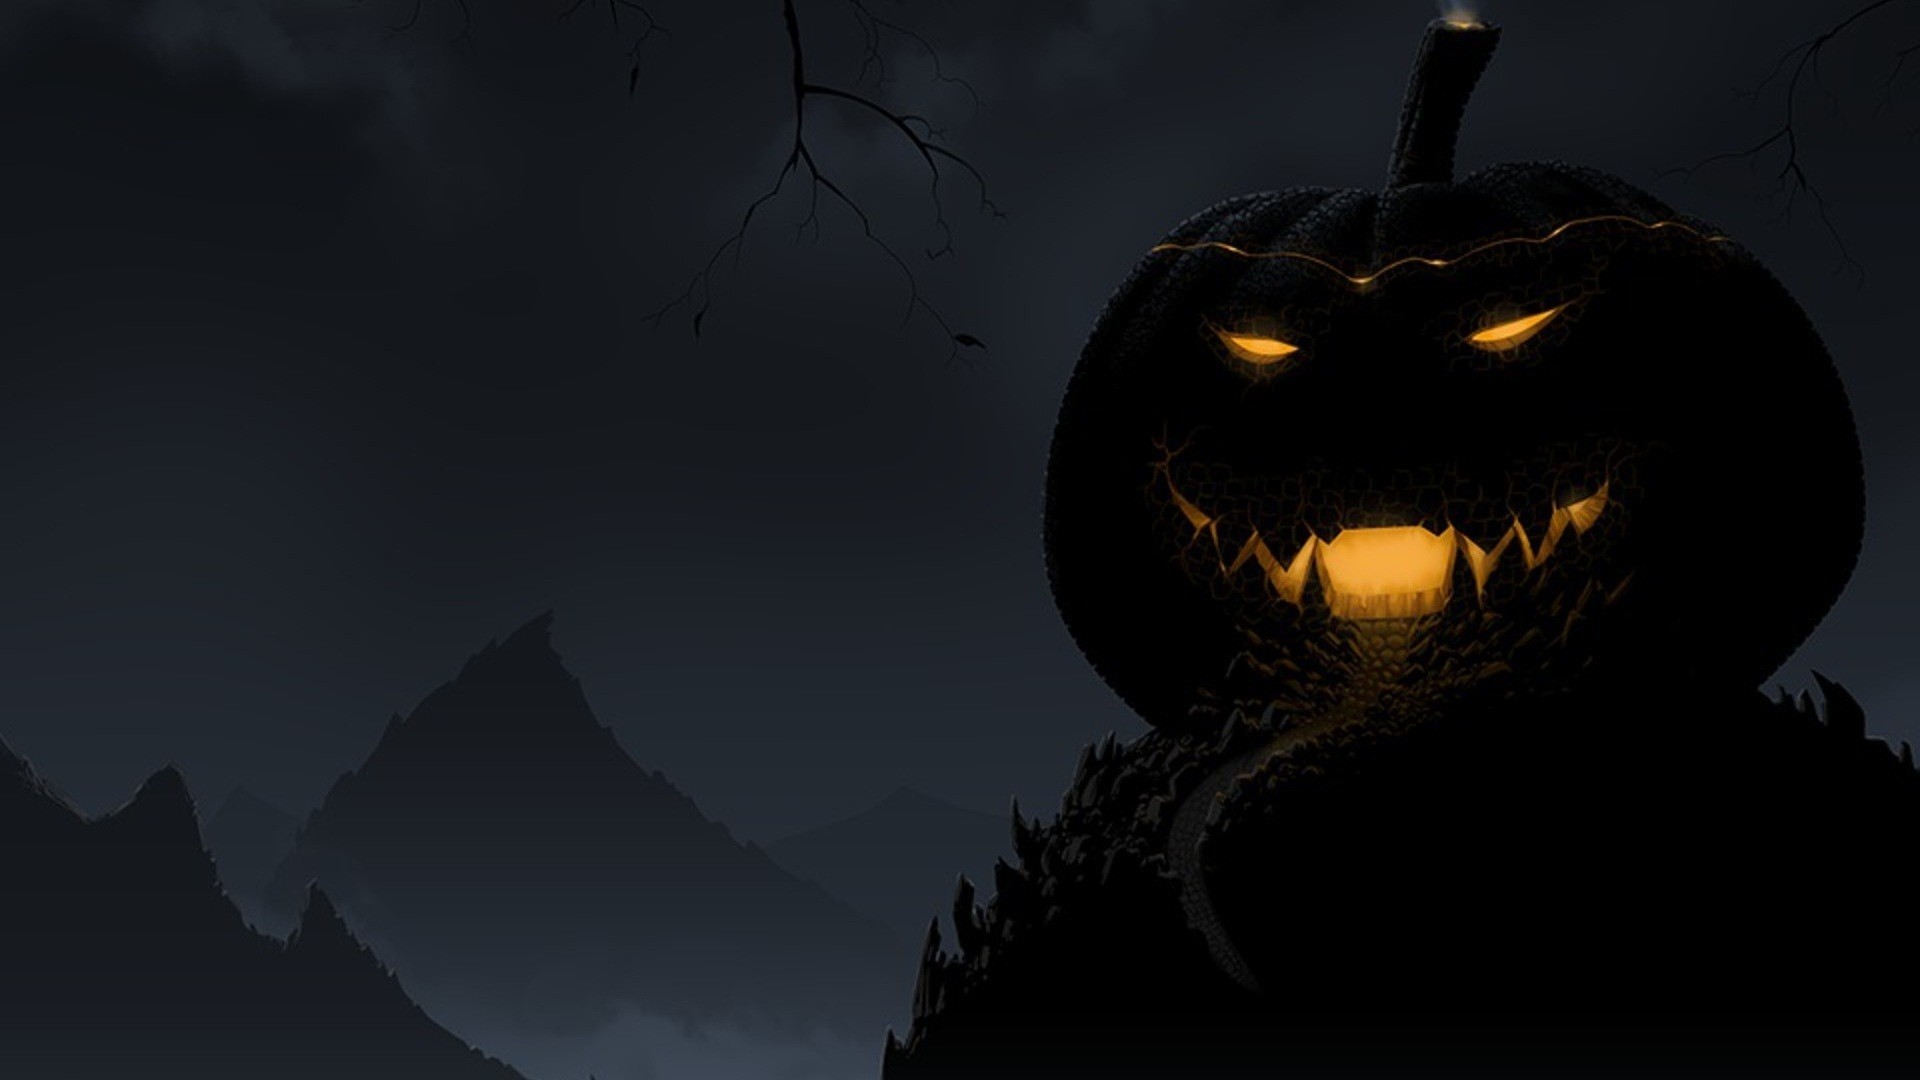 1920x1080 Full Size of Halloween: Halloween Why Is Holiday Consideredhy Fact For  Kidswhy Not Pagan: ...